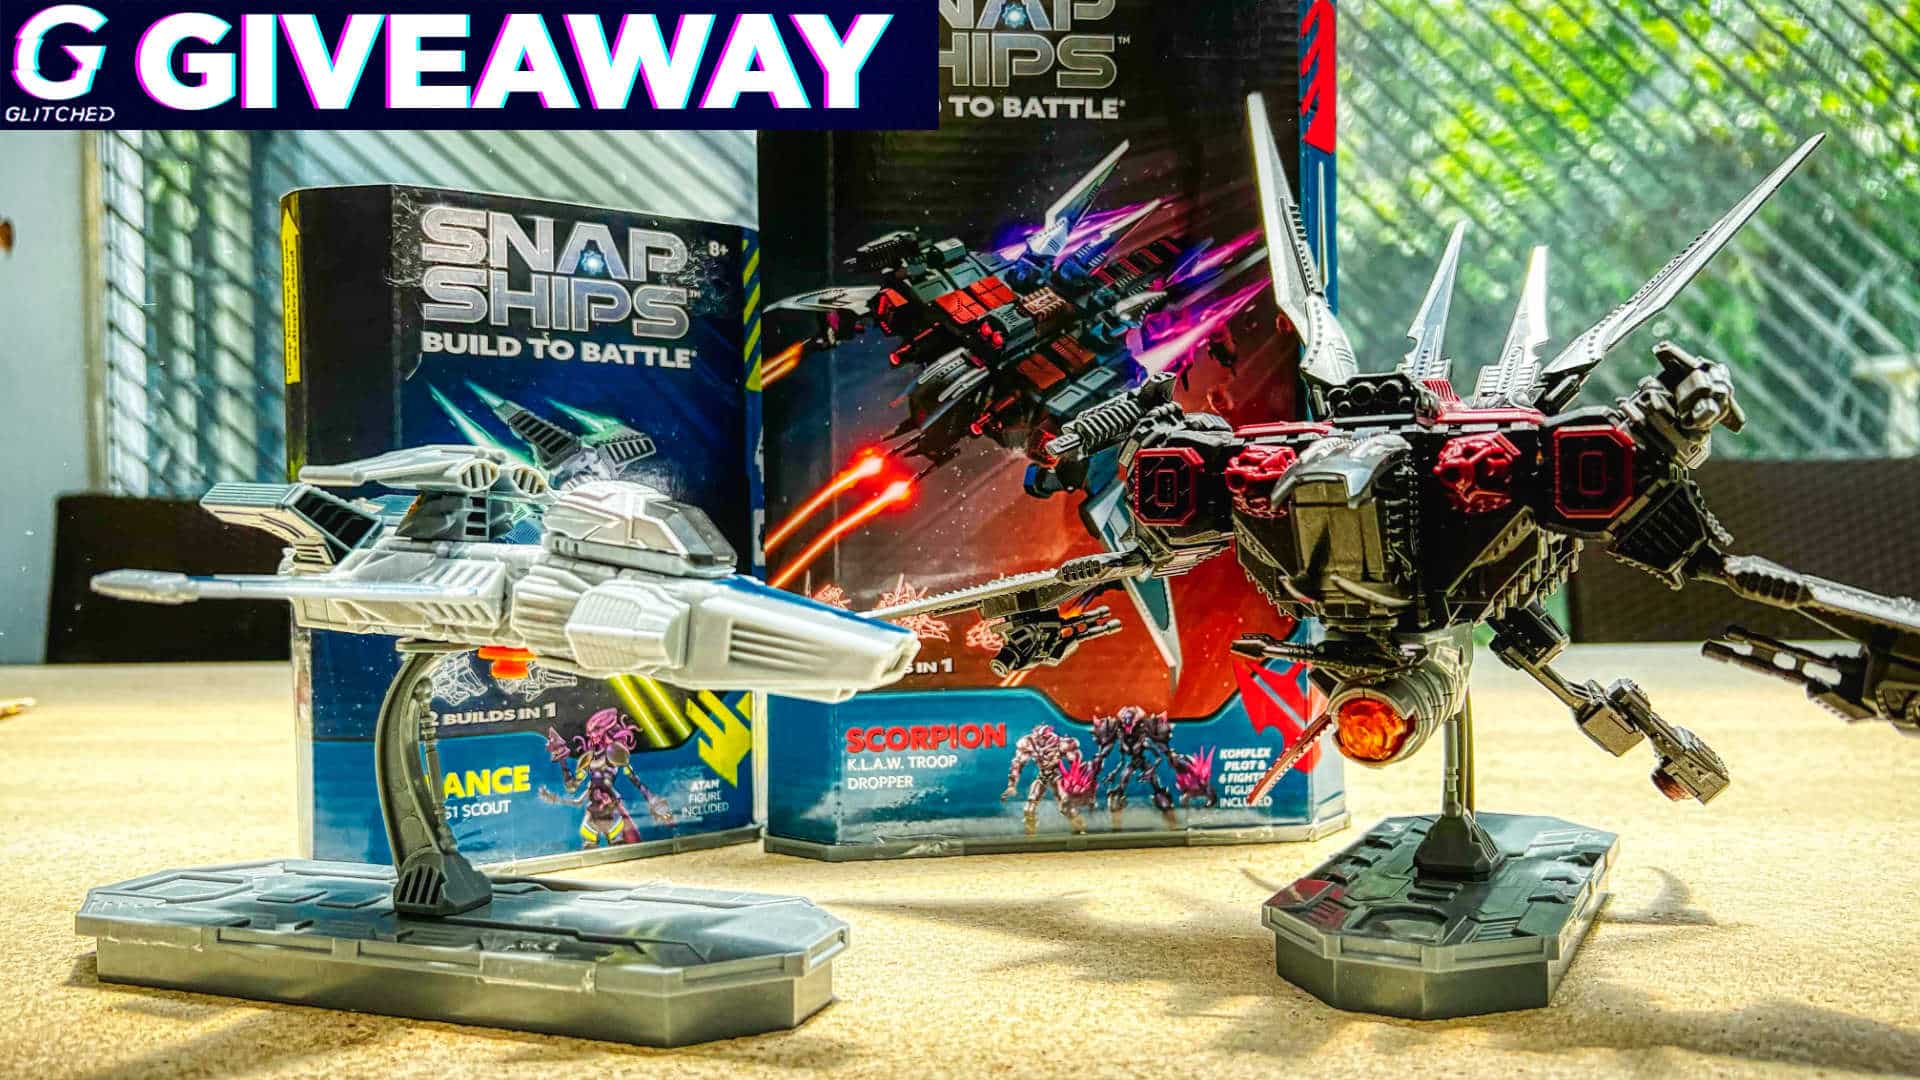 Win a Snap Ships Toy Bundle With SolarPop